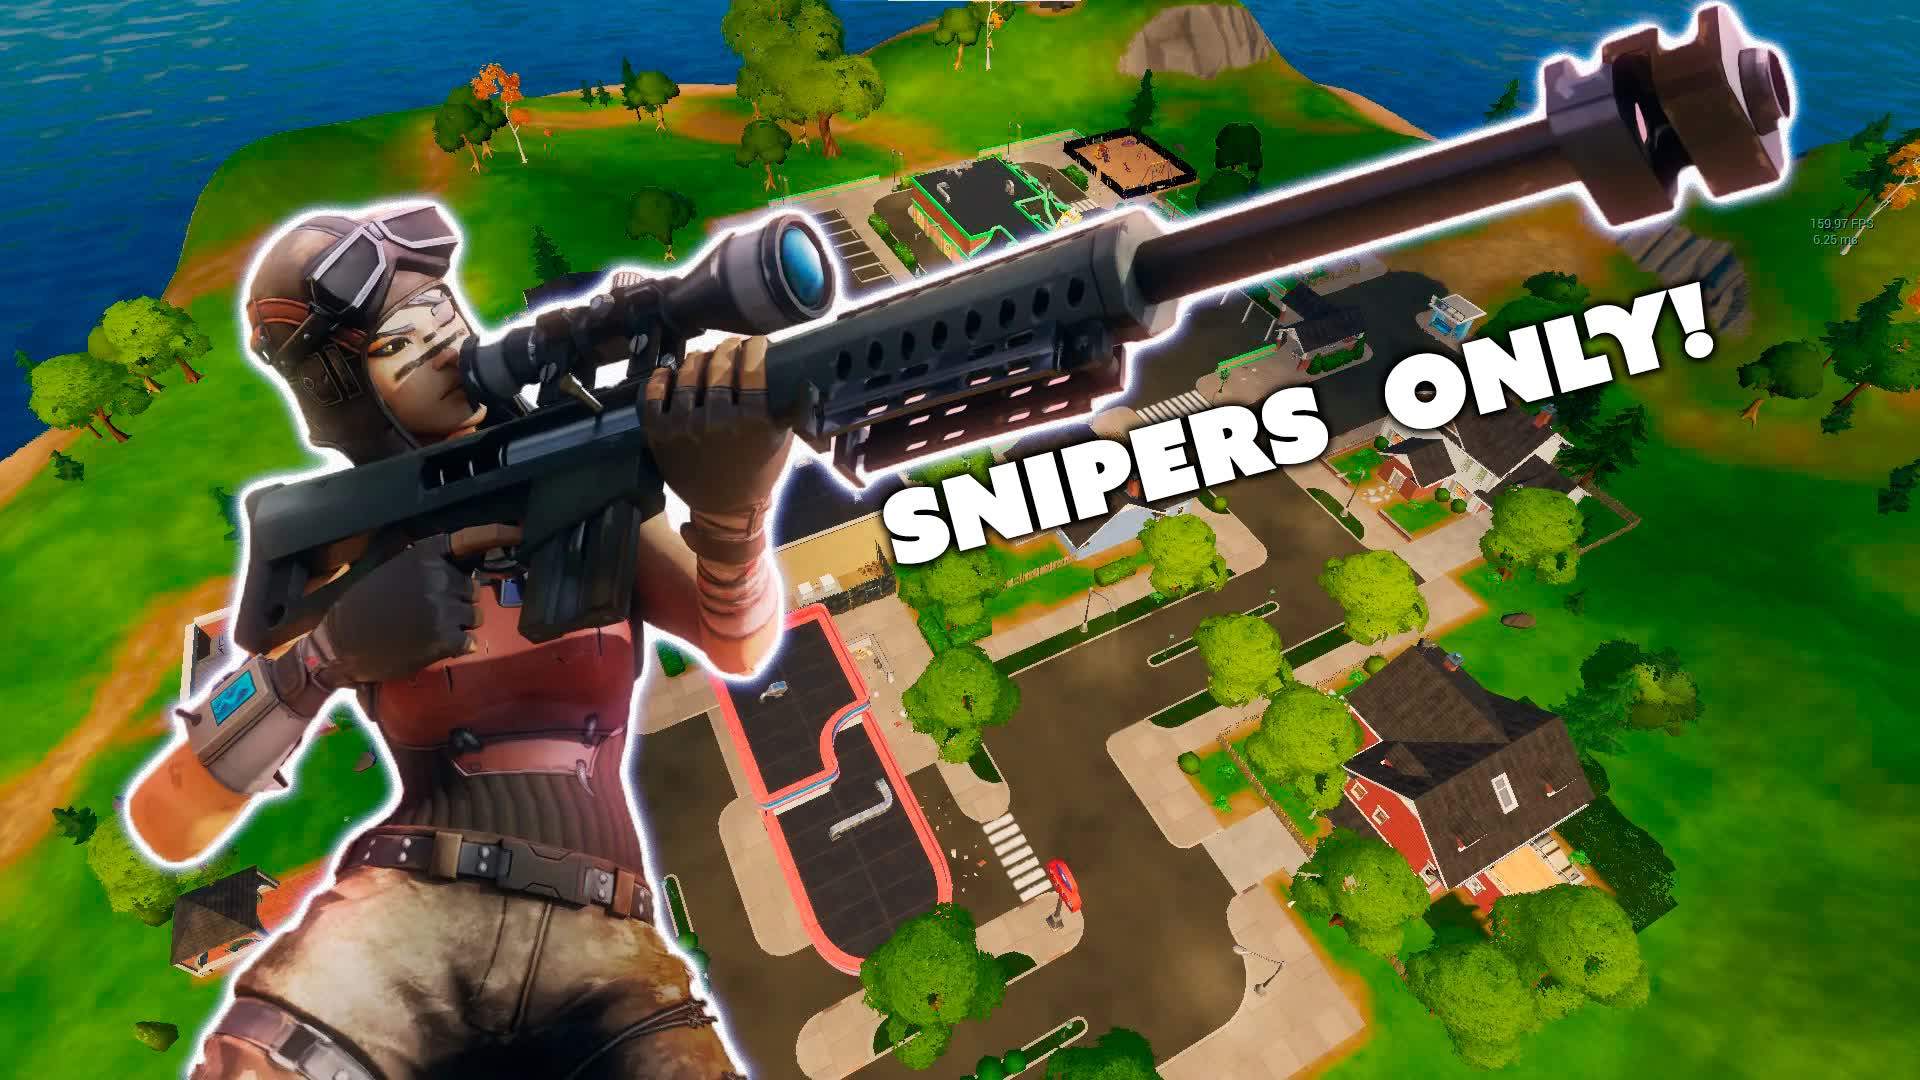 Snipers Only! 🎯 [OG WEAPONS]